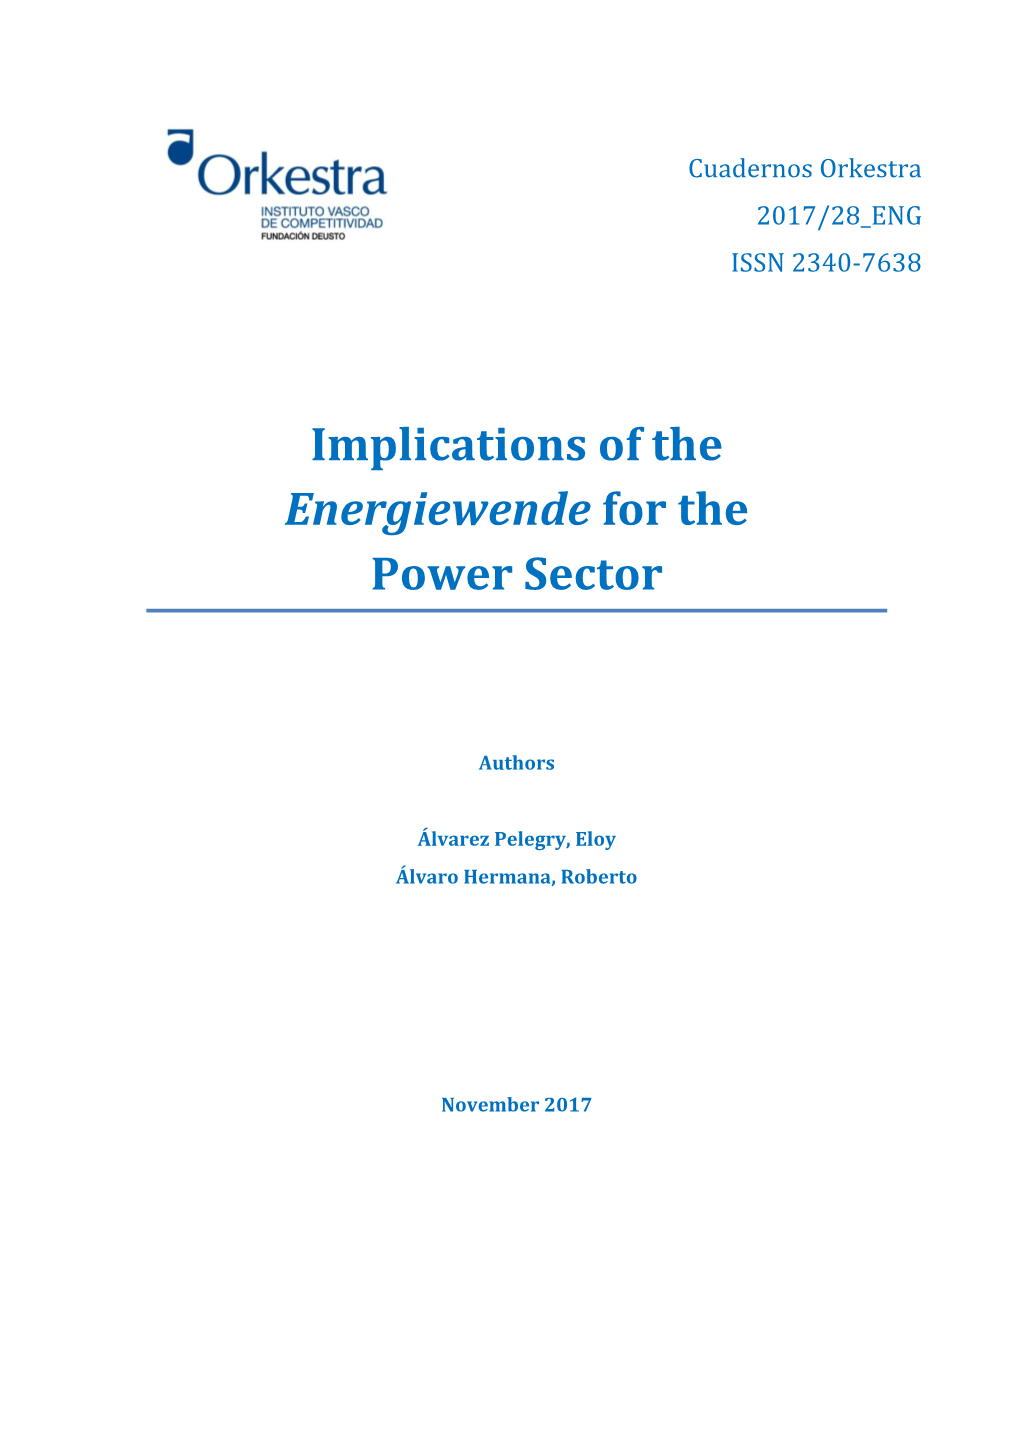 Implications of the Energiewende for the Power Sector